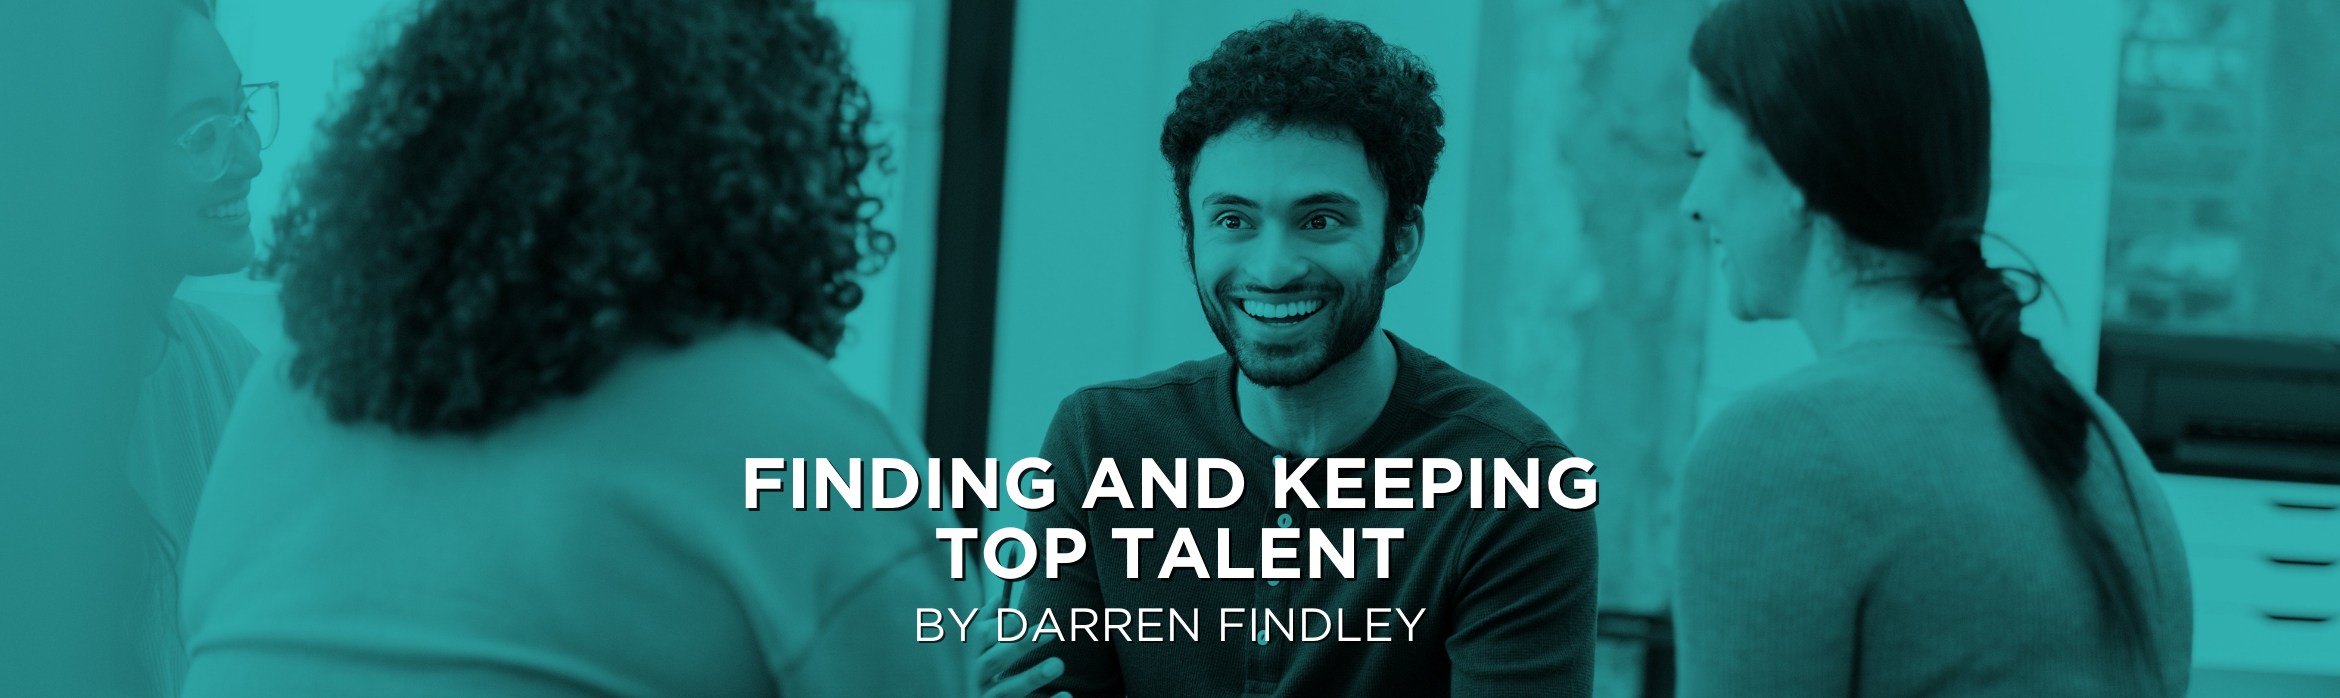 Finding and Keeping Top Talent